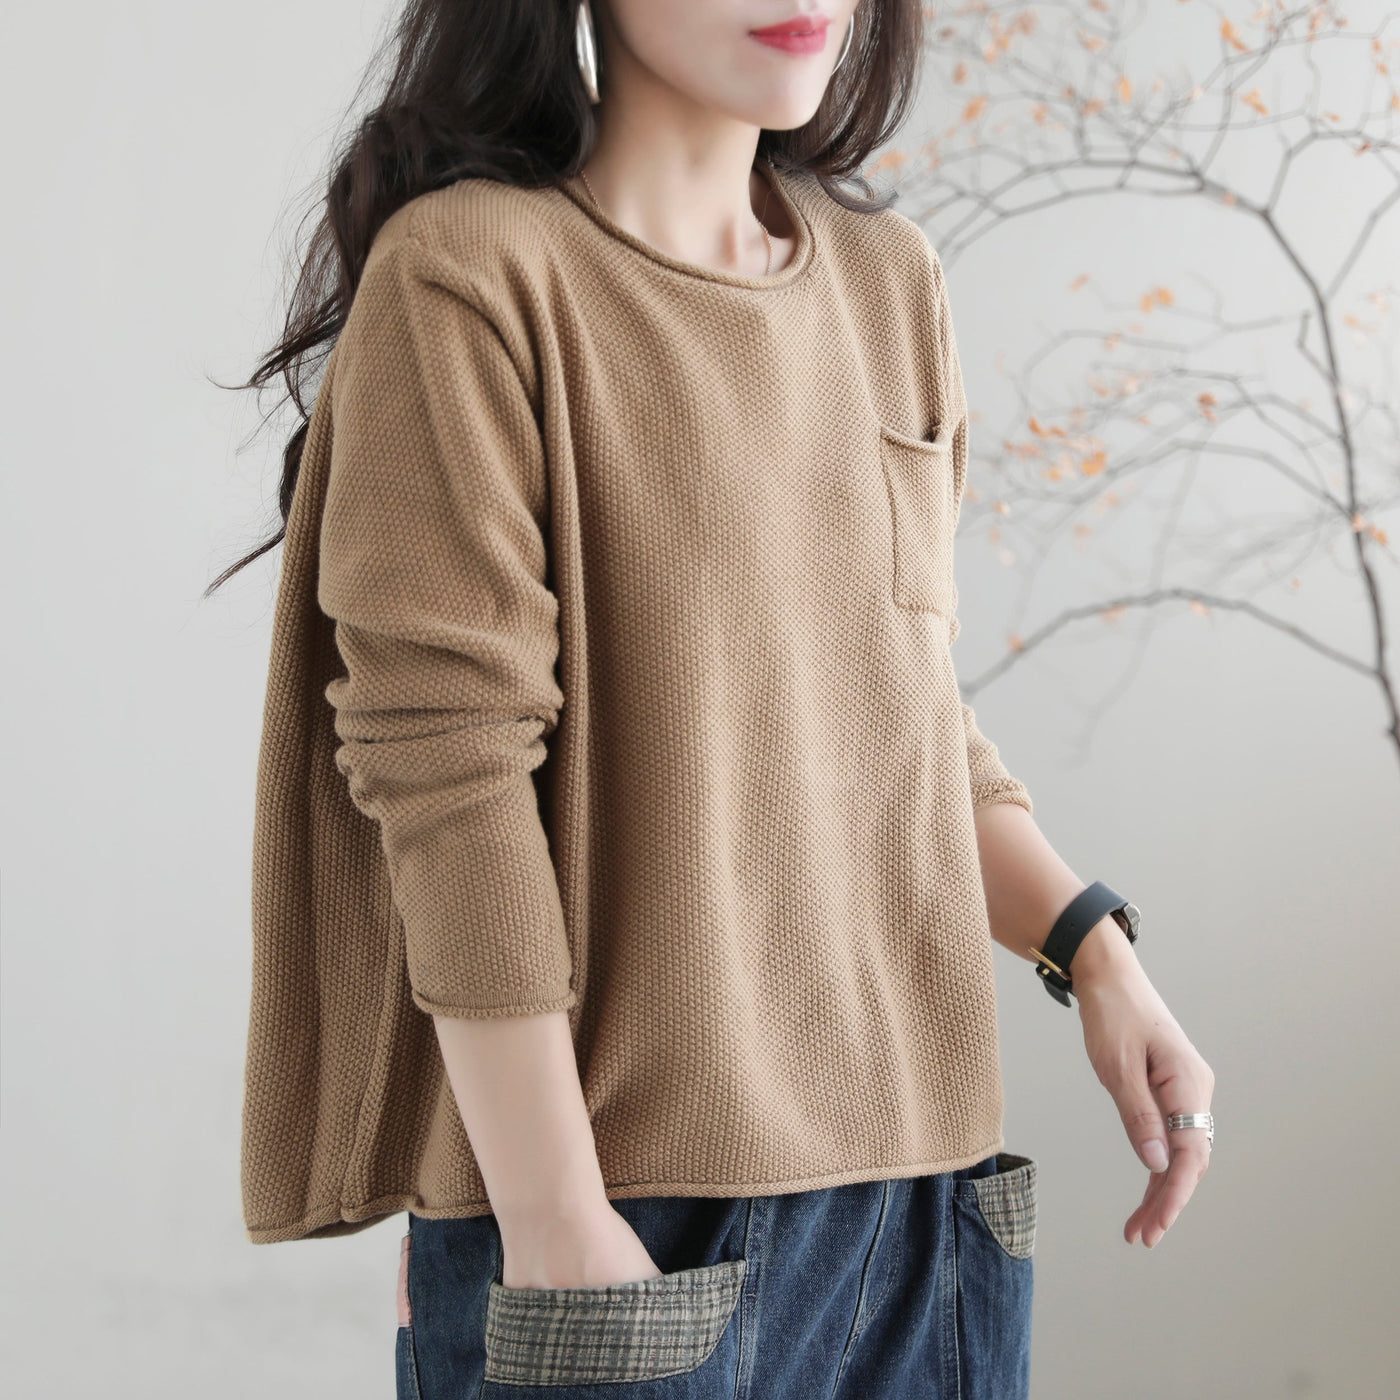 Women Autumn Solid Retro Cotton Knitted Sweater Aug 2022 New Arrival One Size Khaki 